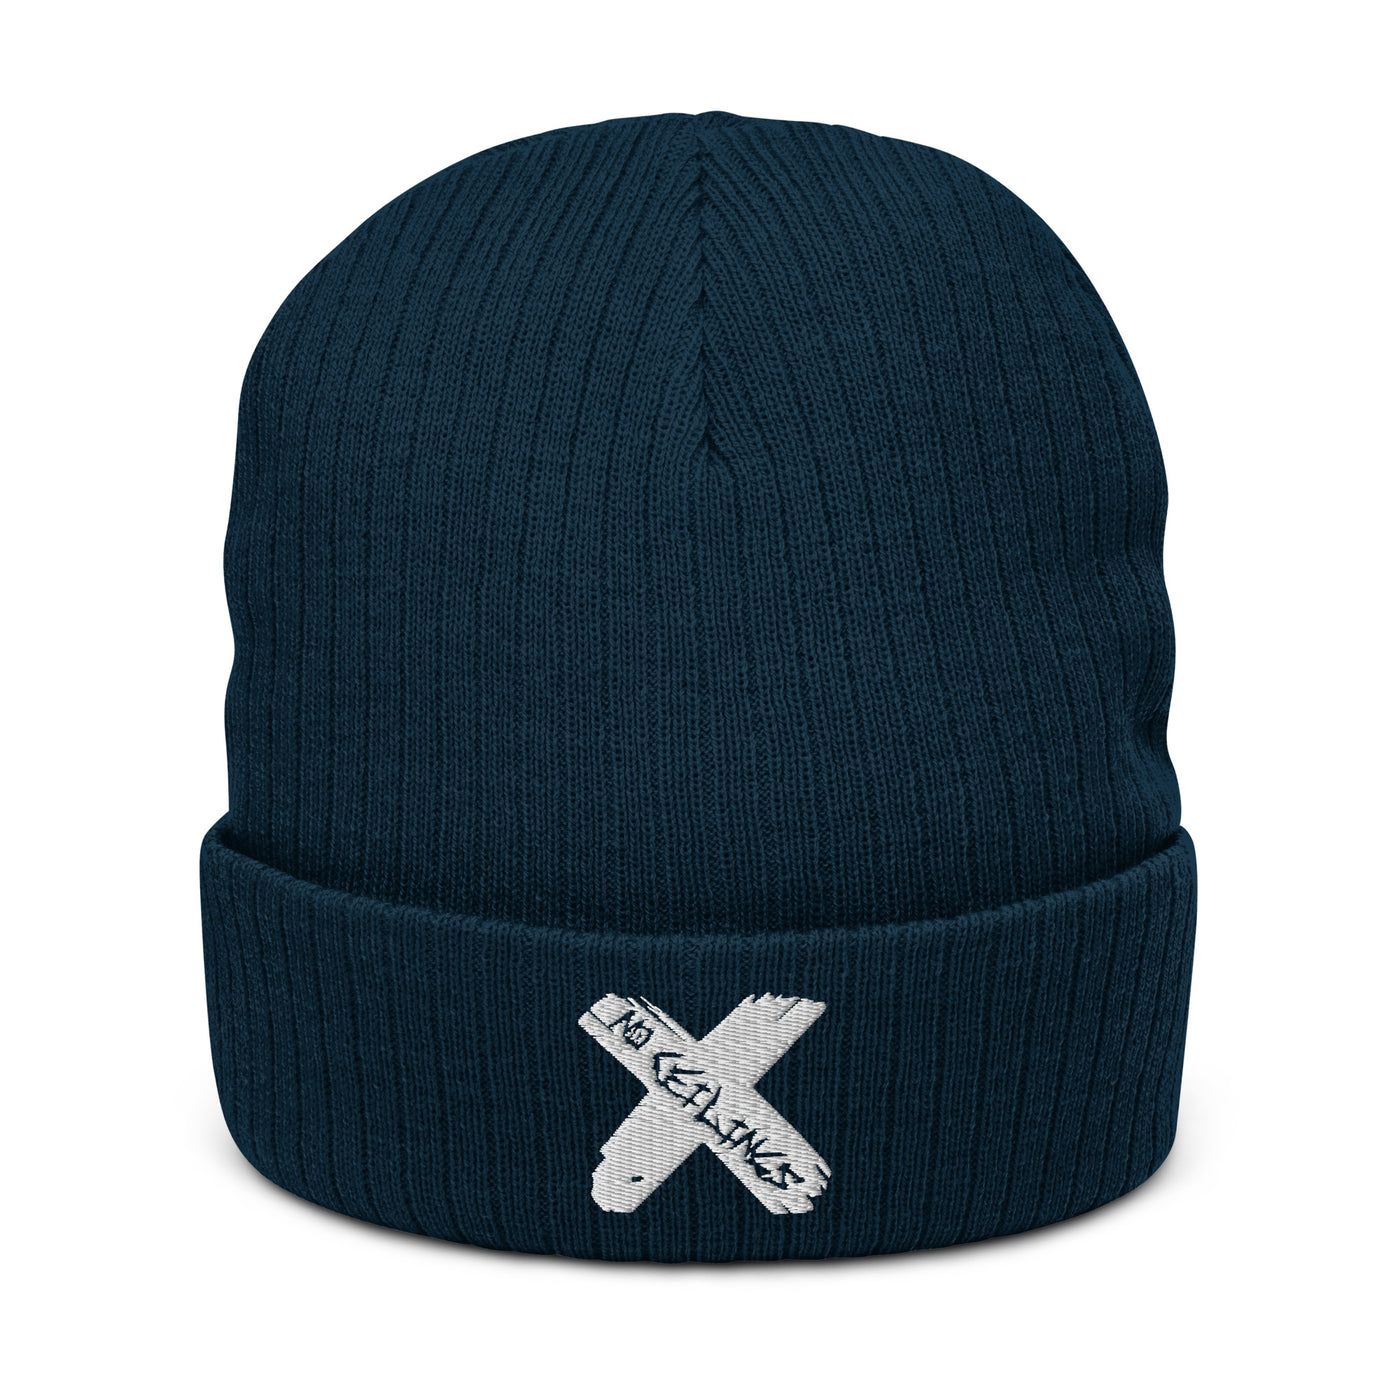 X style Ribbed knit beanie